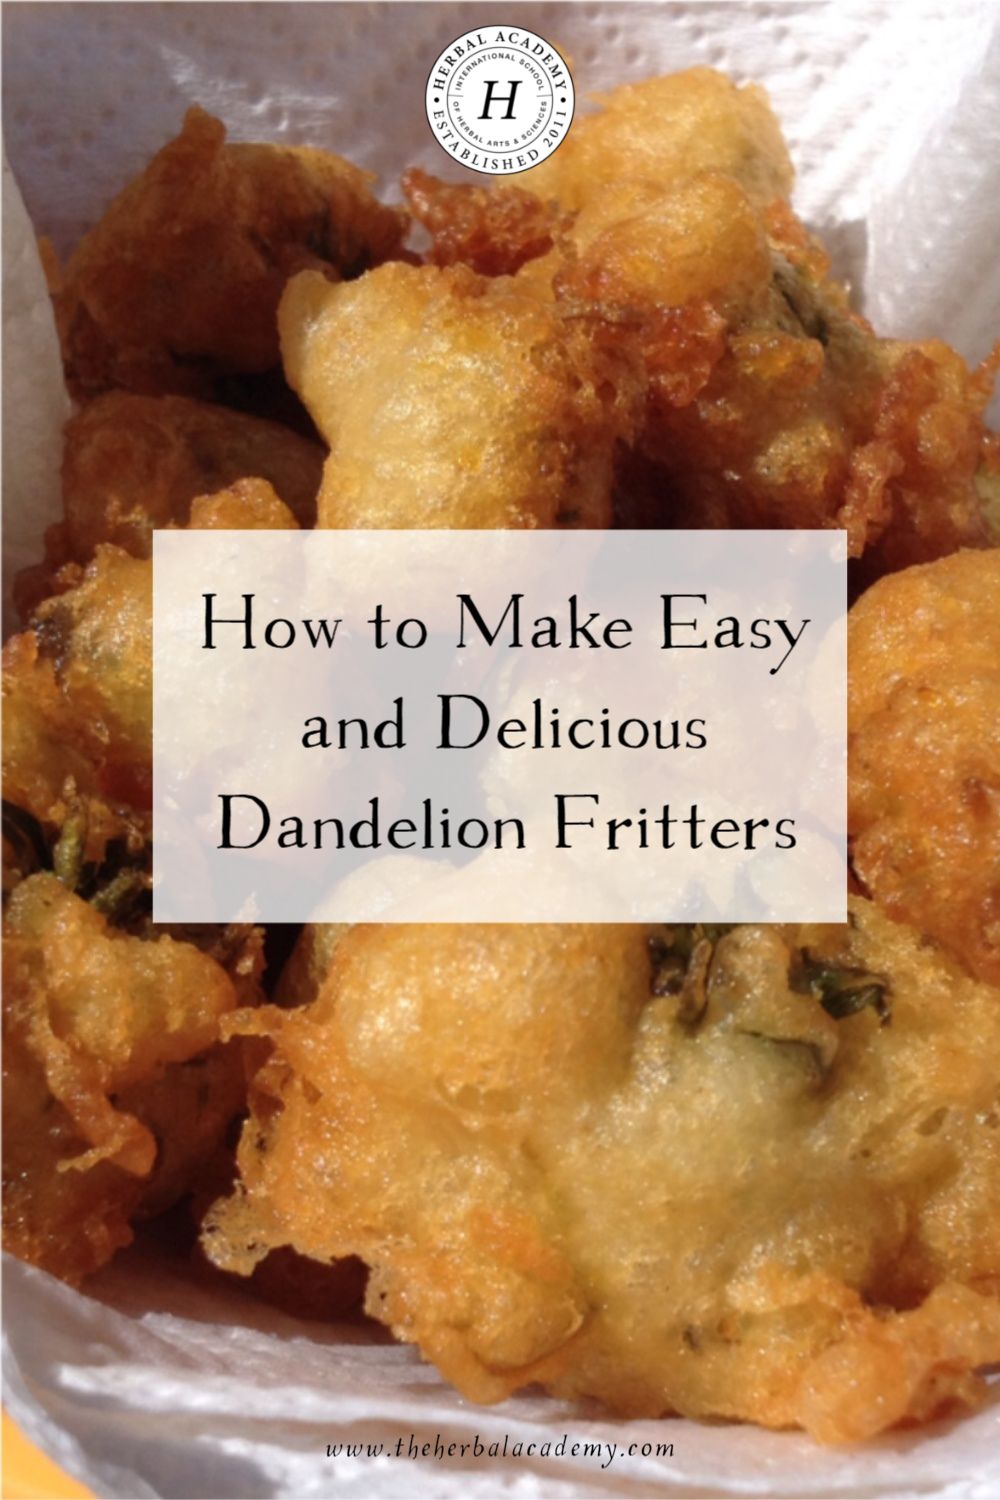 How to Make Easy and Delicious Dandelion Fritters | Herbal Academy | These dandelion fritters are delicious as a starter, snack, or side, and can be made anytime the flowers are blooming.